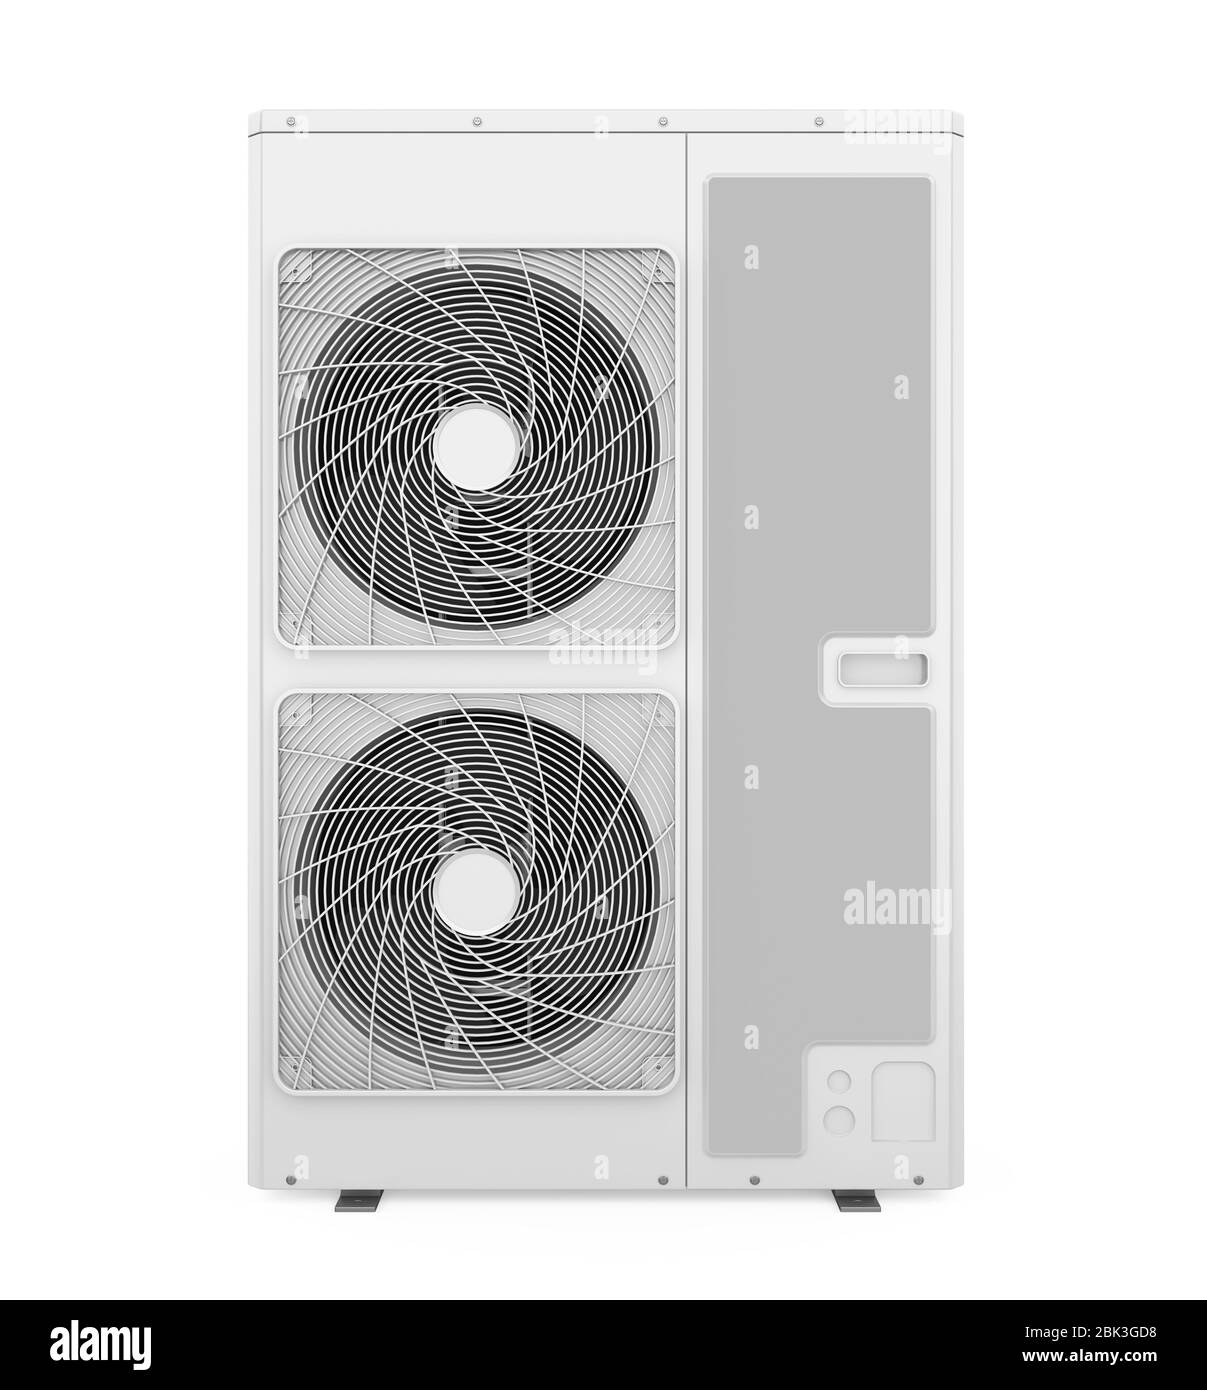 Air Conditioner Outdoor Unit Isolated Stock Photo